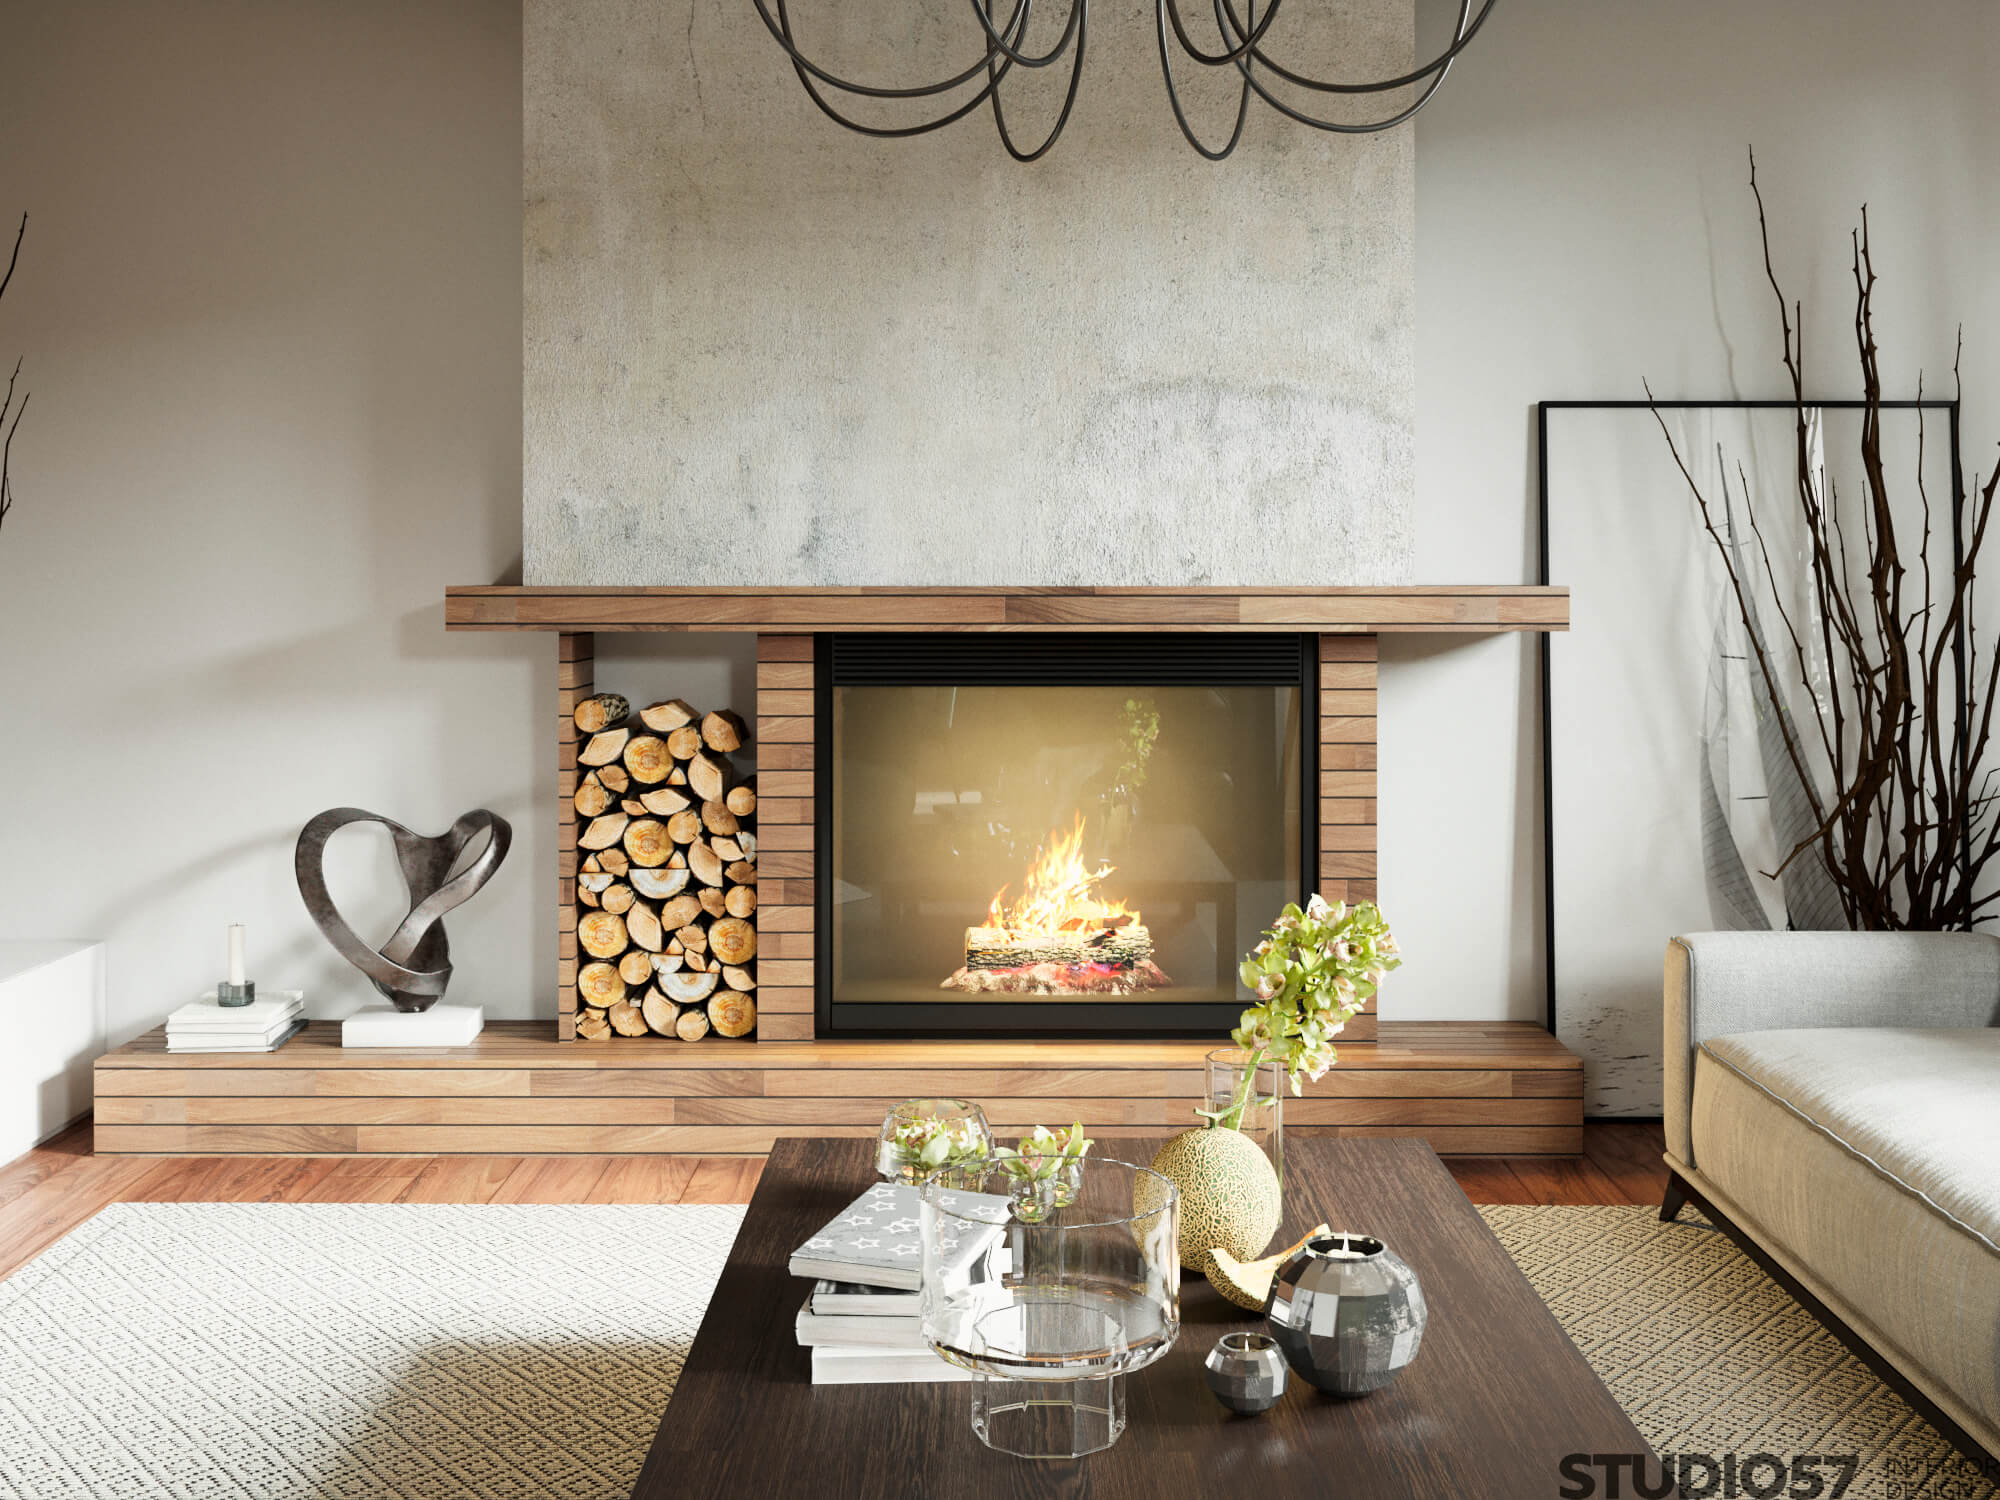 Fireplace in the living room of a private house